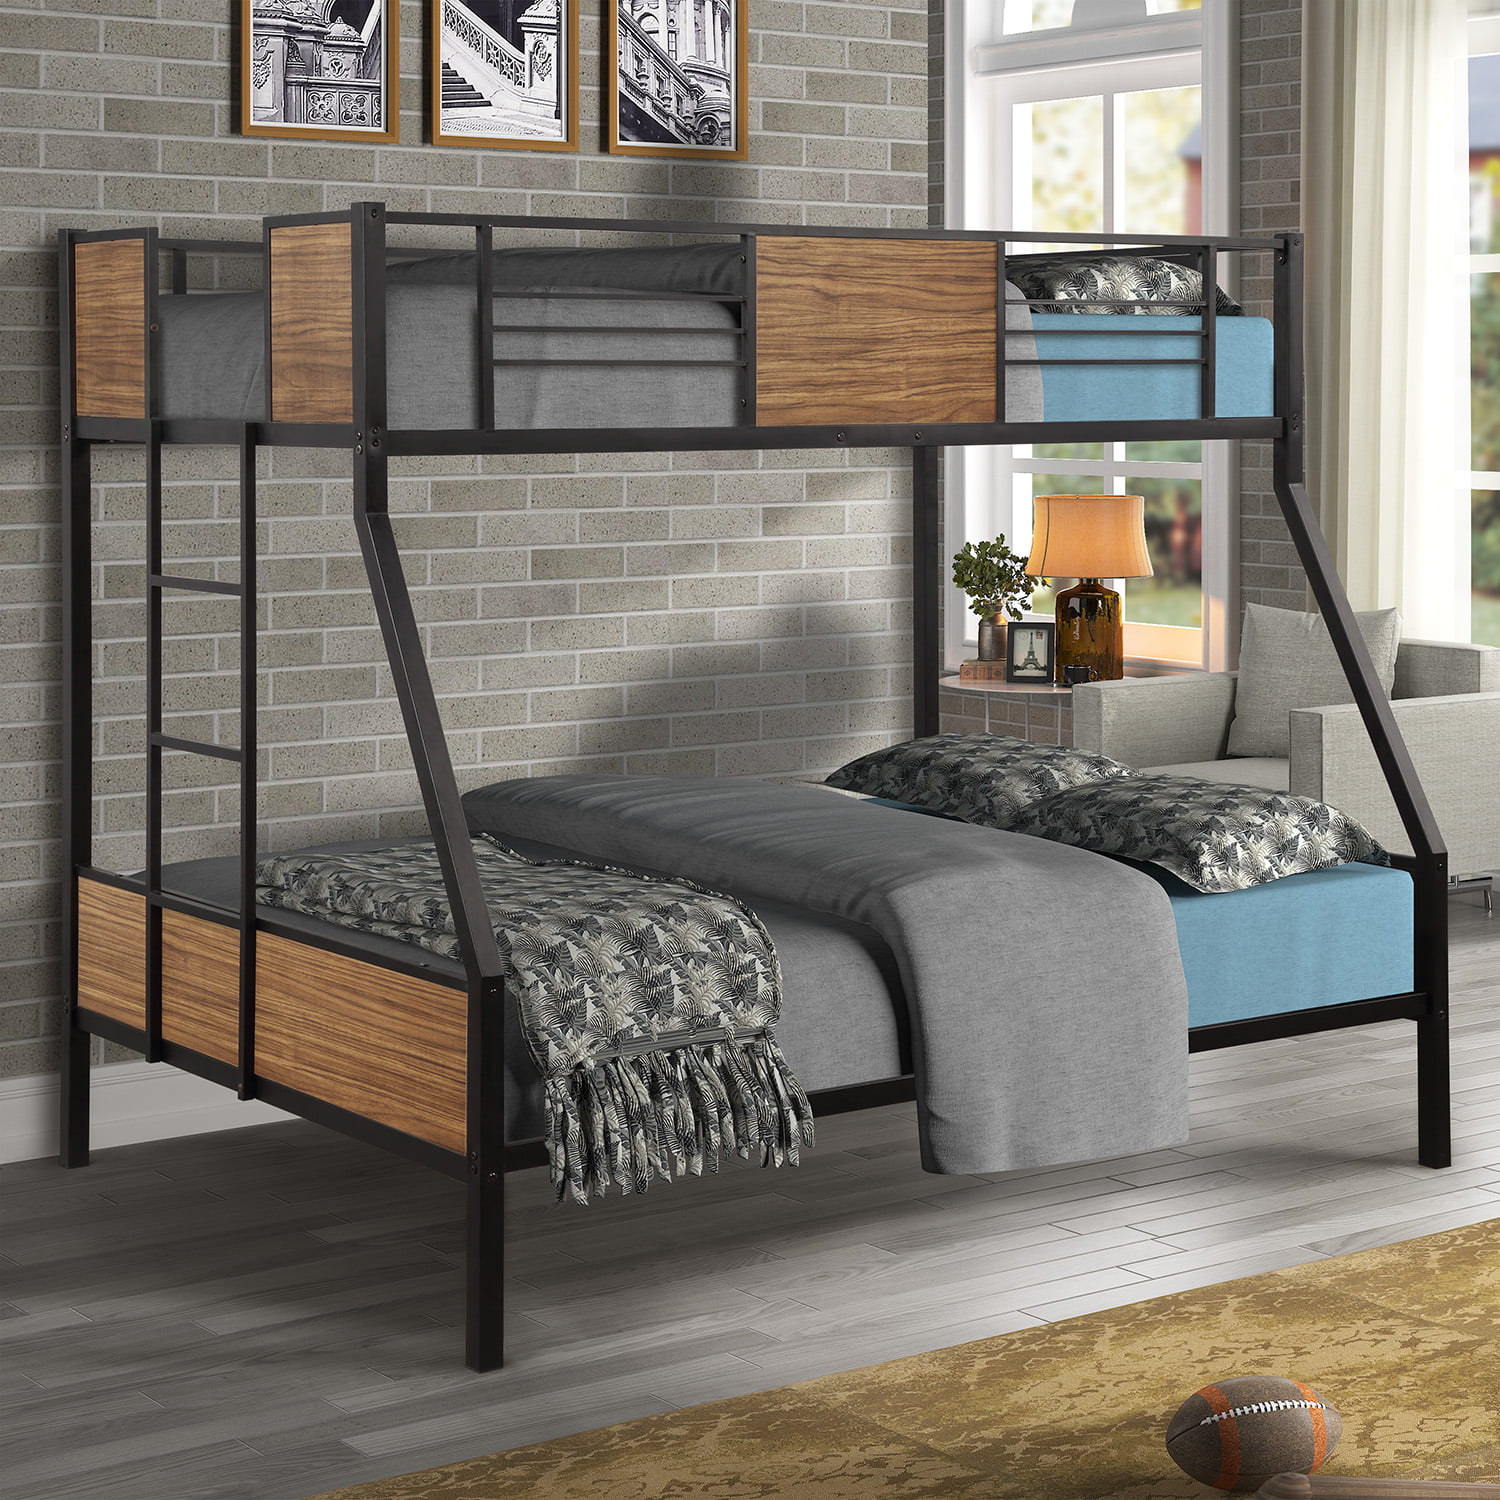 Jumper Twin Over Full Bunk Bed Steel, Heavy Duty Full Over Full Bunk Beds